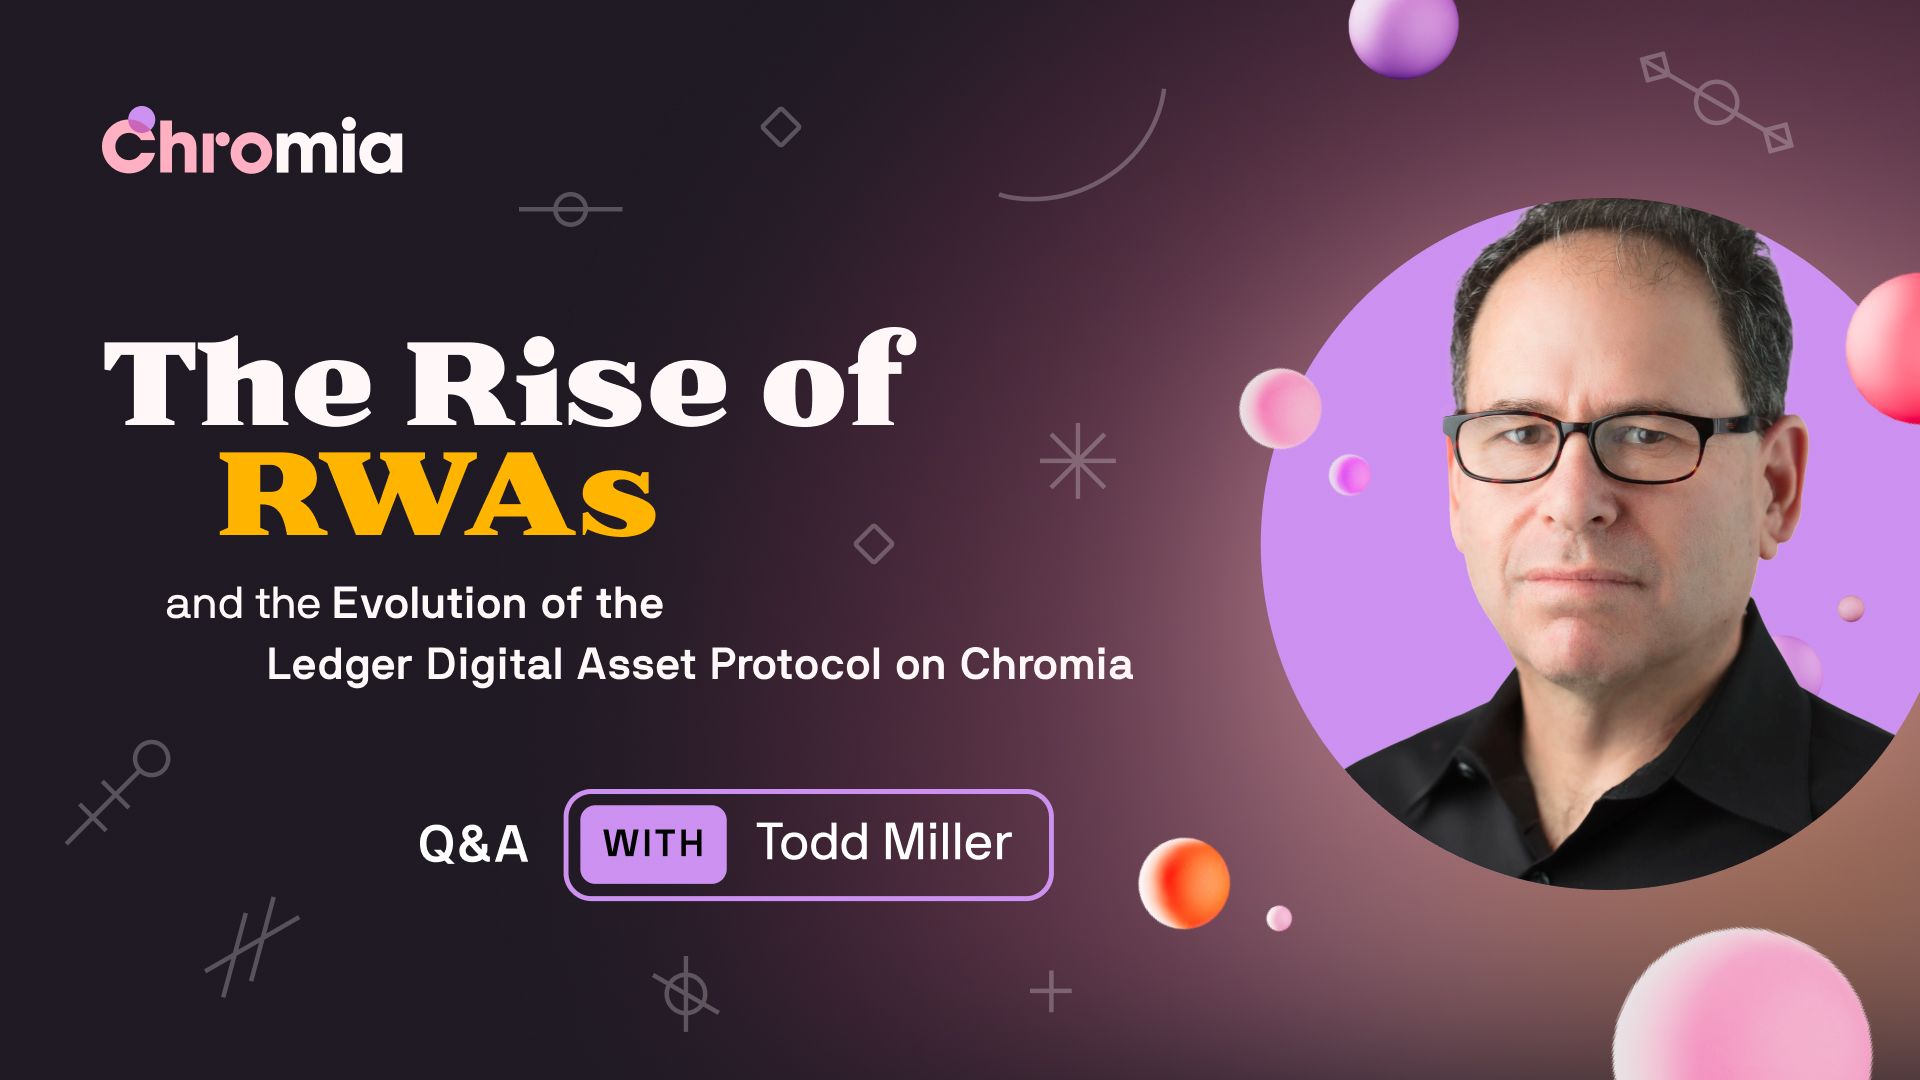 Q&A with Todd Miller: The Rise of RWAs and the Evolution of the Ledger Digital Asset Protocol on Chromia